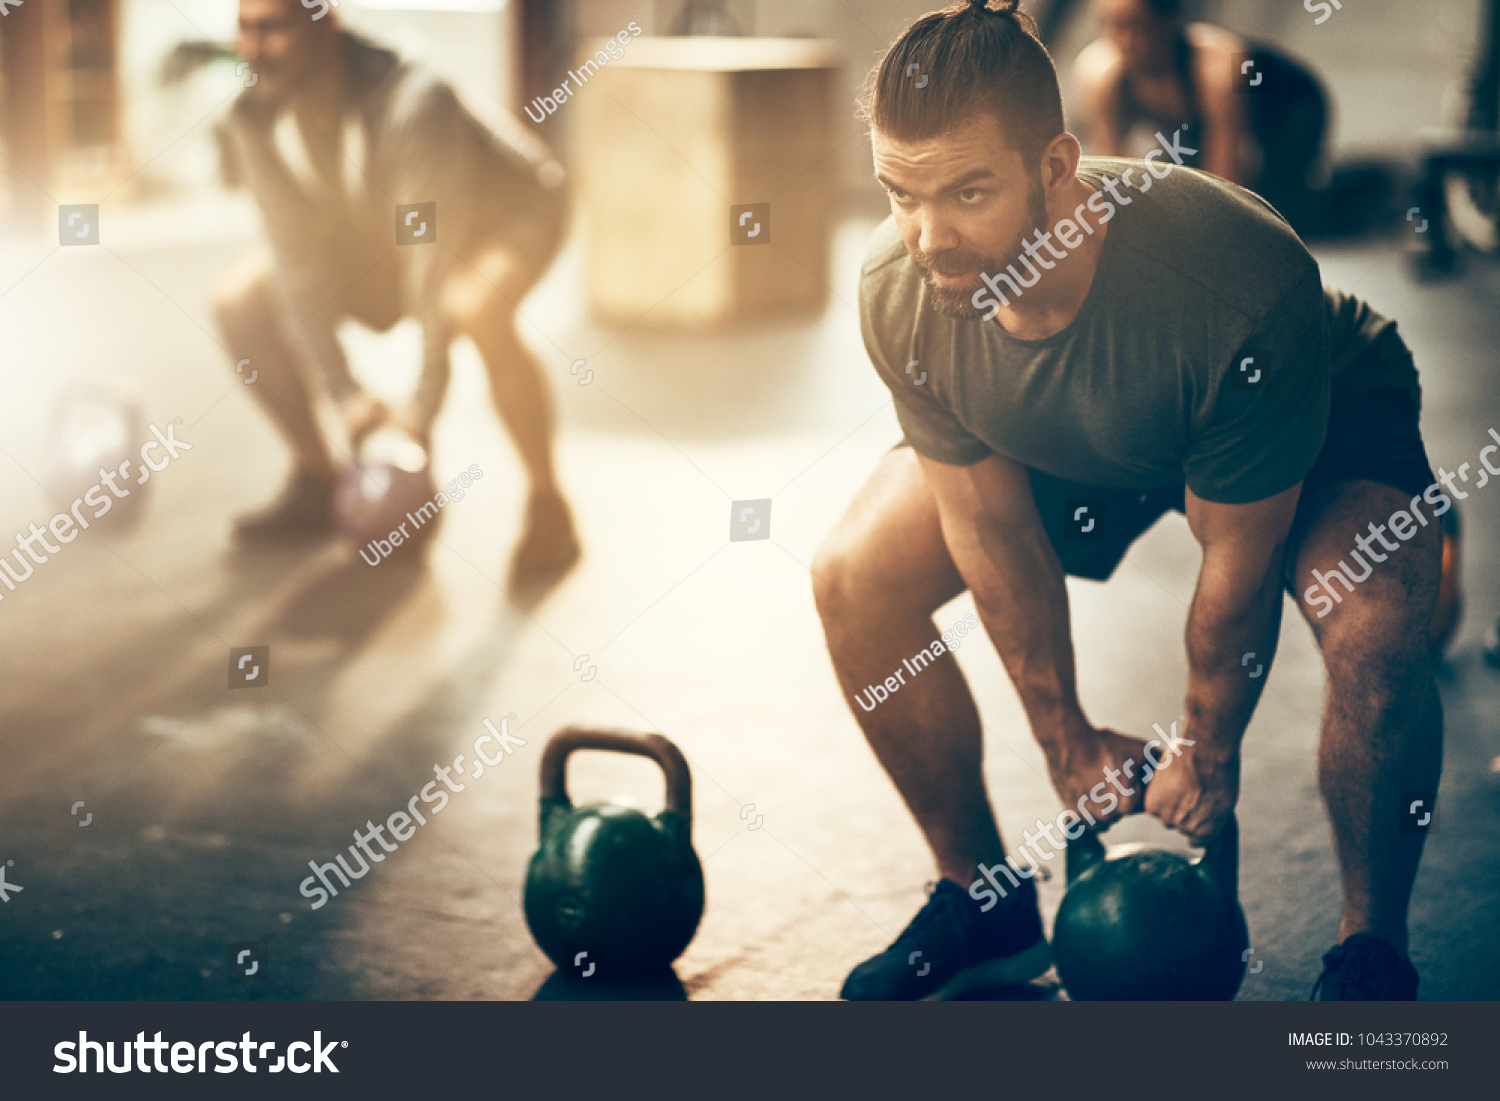 Fit young man in sportswear focused on lifting a dumbbell during an exercise class in a gym #1043370892